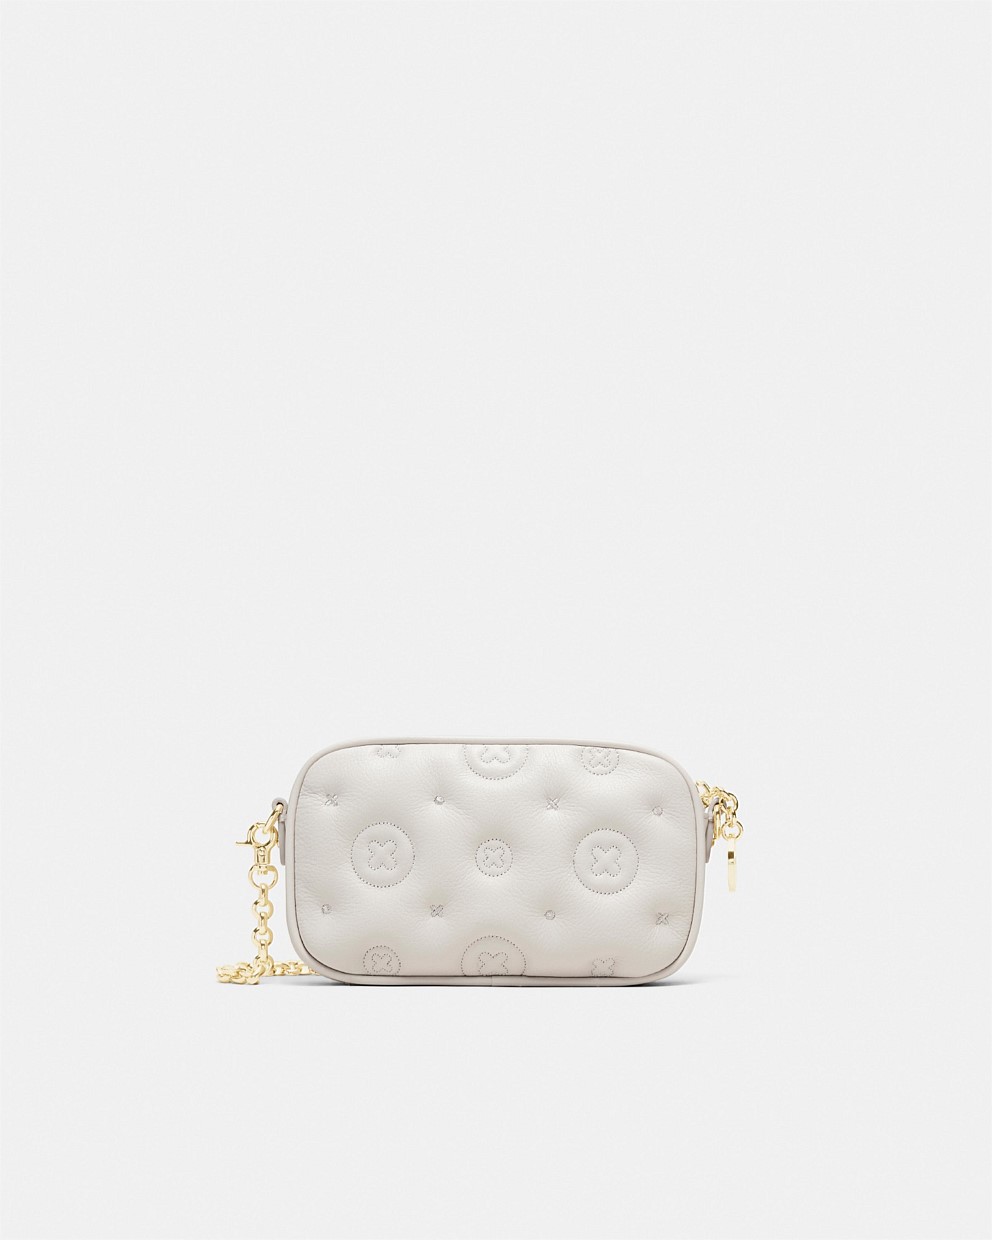 OYSTER FLASHBACK LEATHER POUCH CROSSBODY BAG - CROSSBODY BAGS | MIMCO